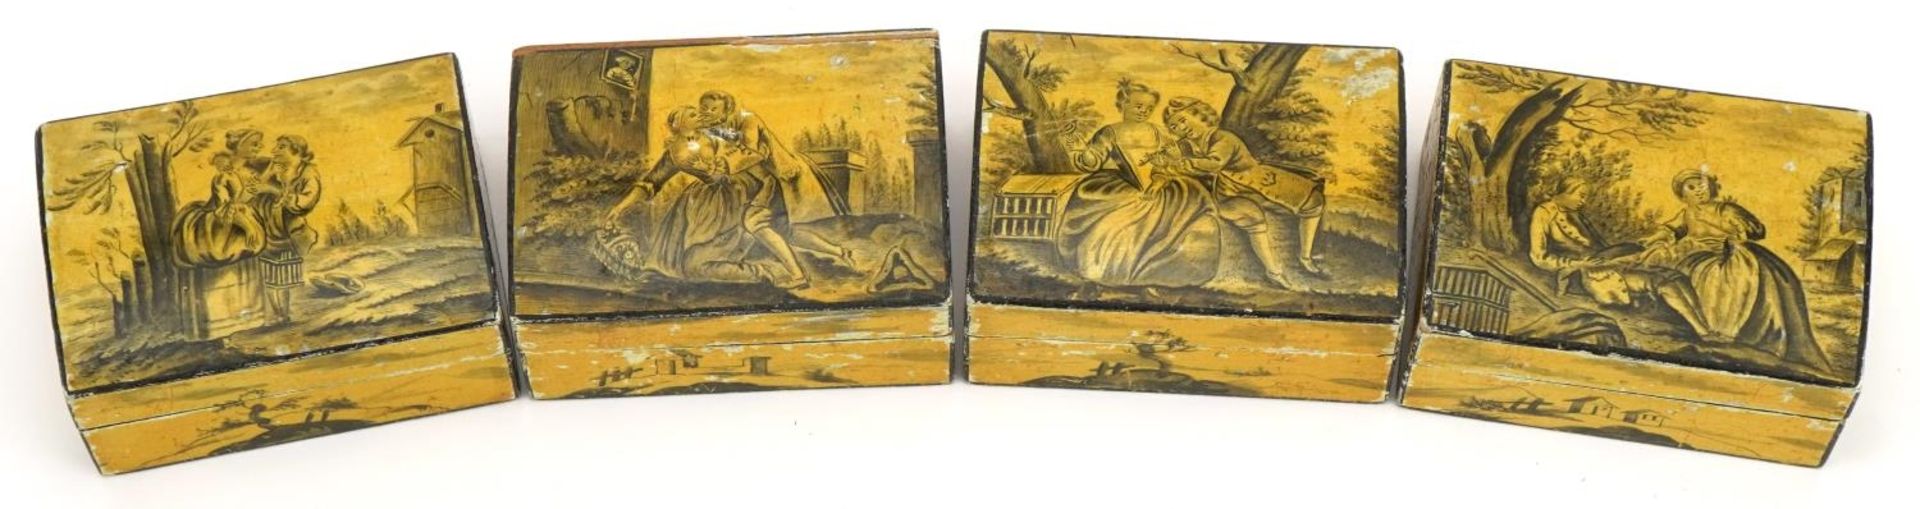 Four 19th century continental lacquered dome top boxes hand painted with classical figures in - Image 2 of 4